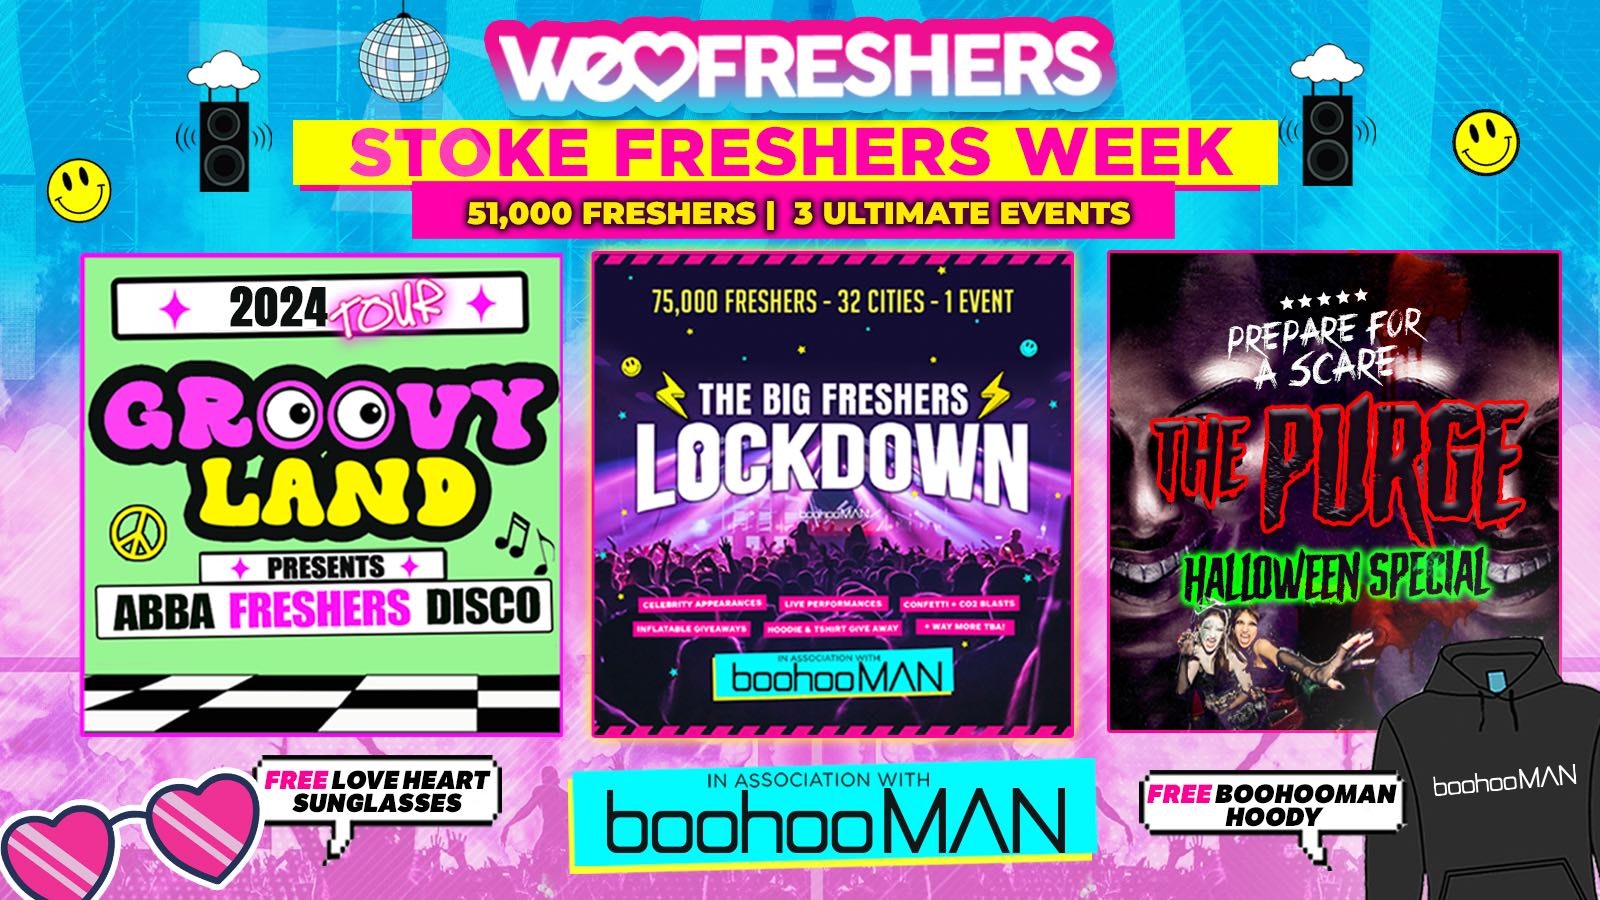 WE LOVE STOKE FRESHERS 2024 in association with boohooMAN ❗3 EVENTS ❗